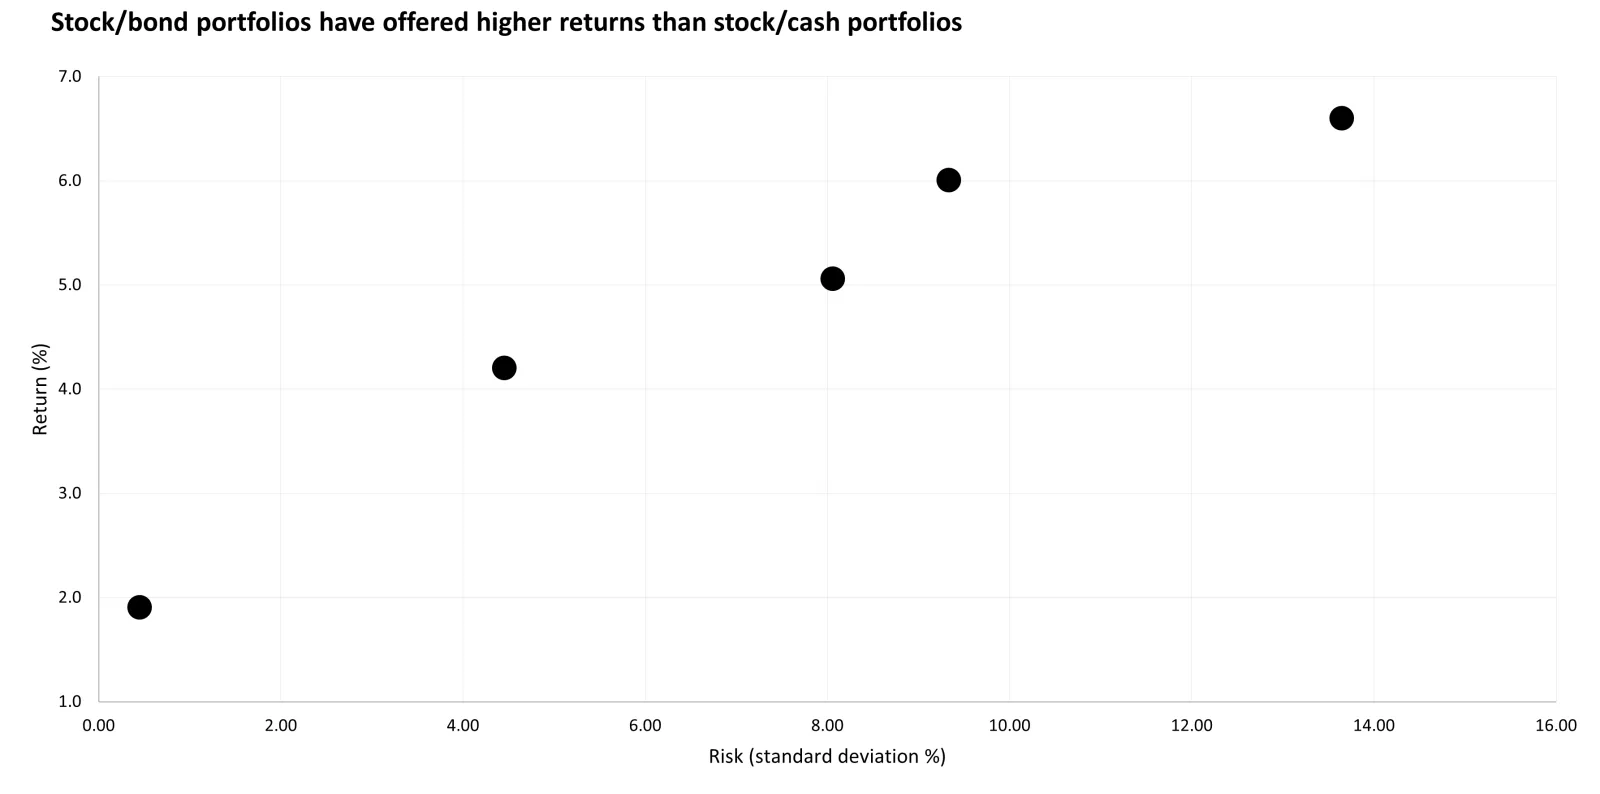 The graph shows that for investors willing to accept a certain level of risk, adding bonds to a stock portfolio may generate better portfolio performance than adding cash.